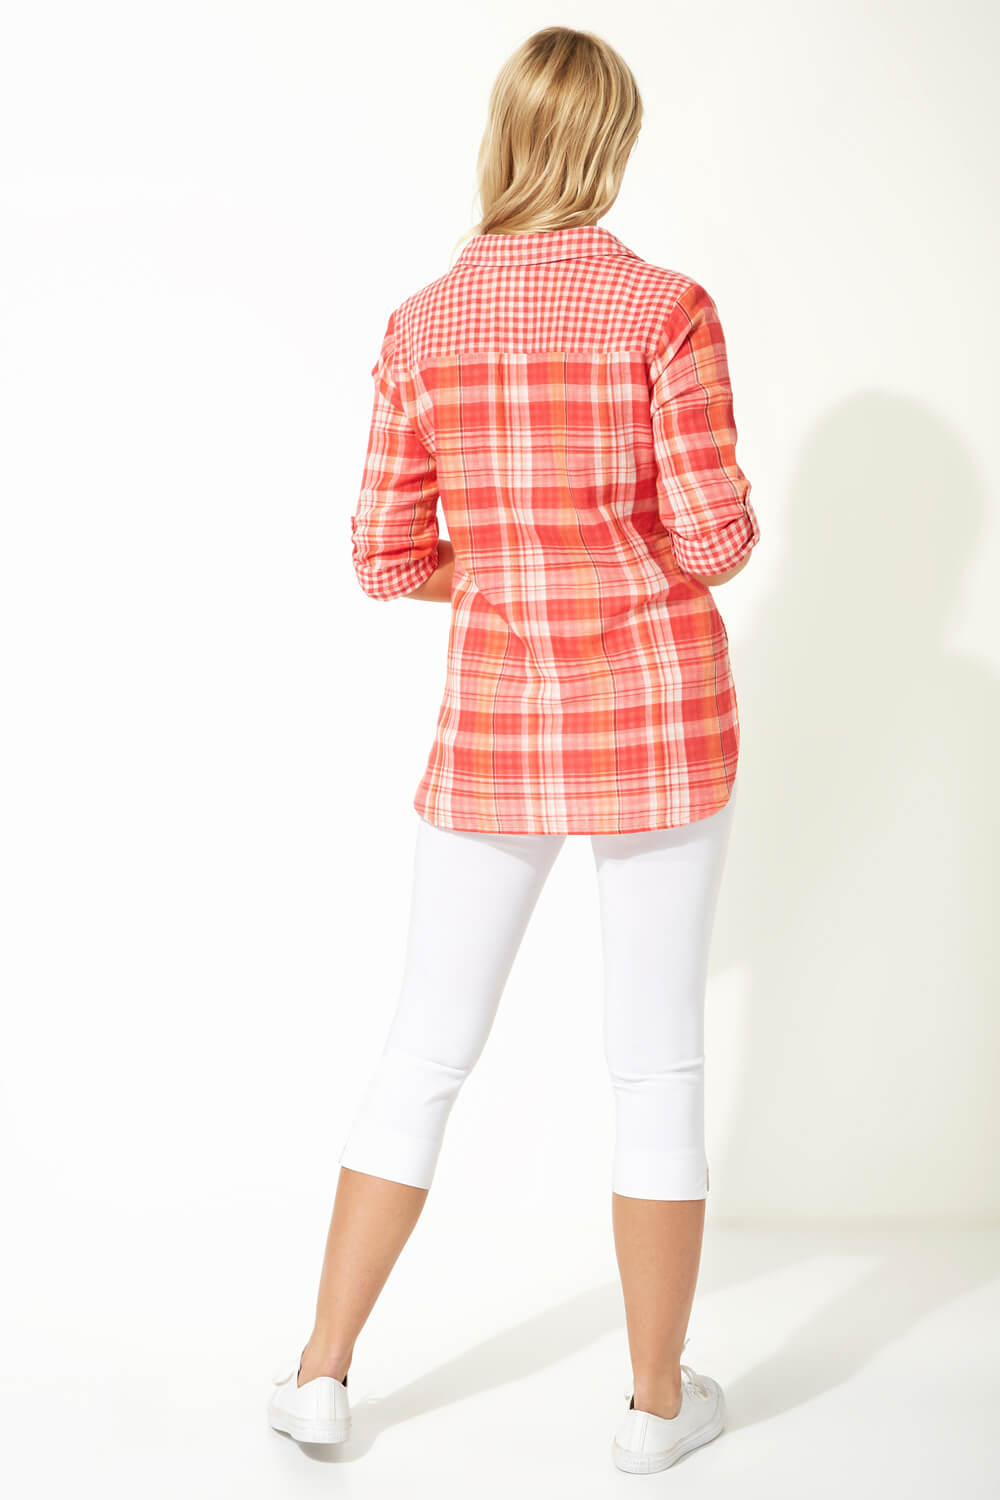 CORAL Contrast Check Print Overshirt, Image 3 of 9